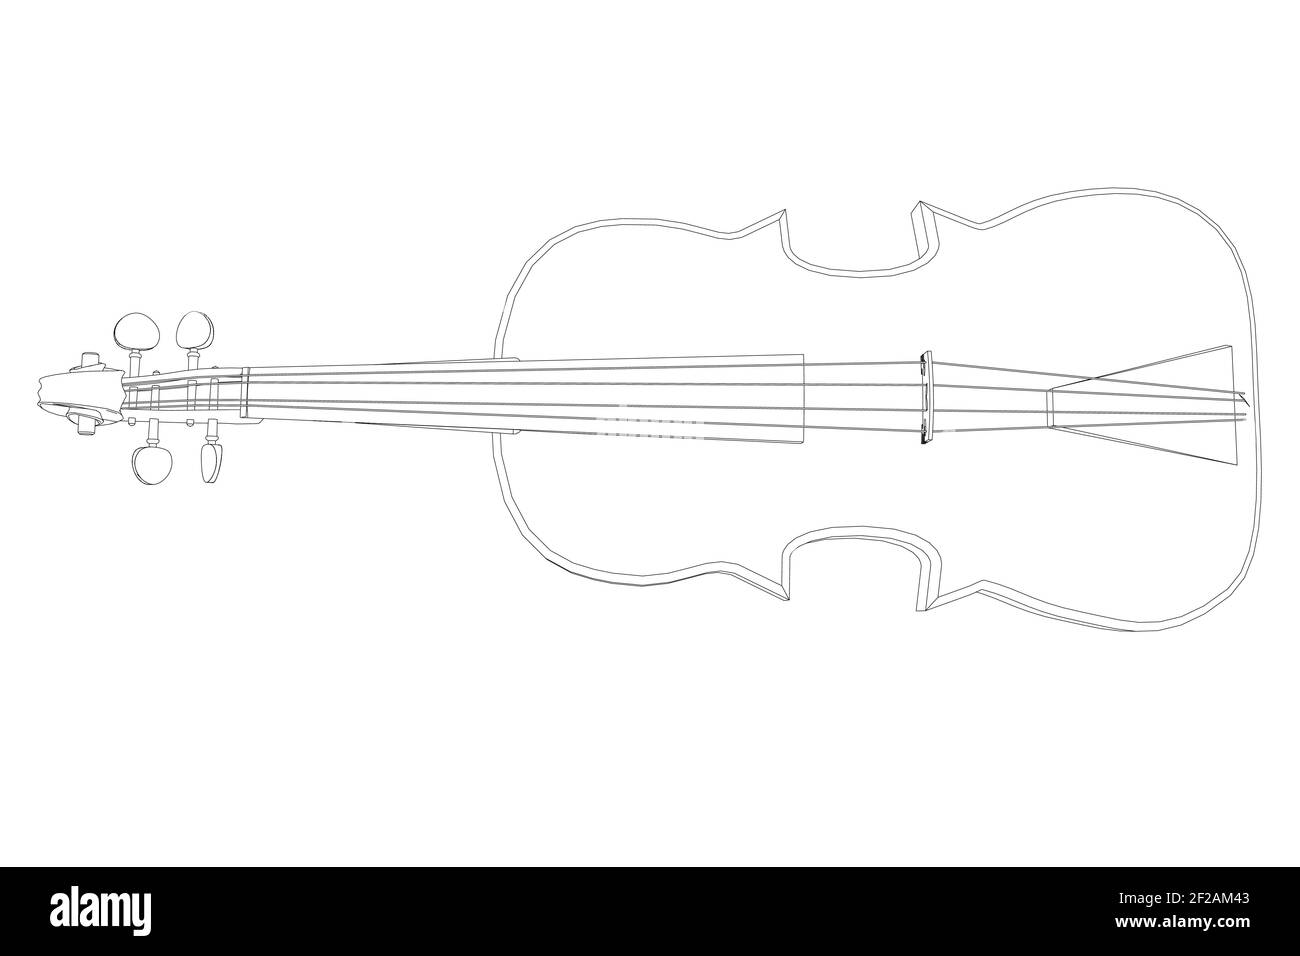 Violin contour from black lines on a white background. Top view Vector illustration. Stock Vector